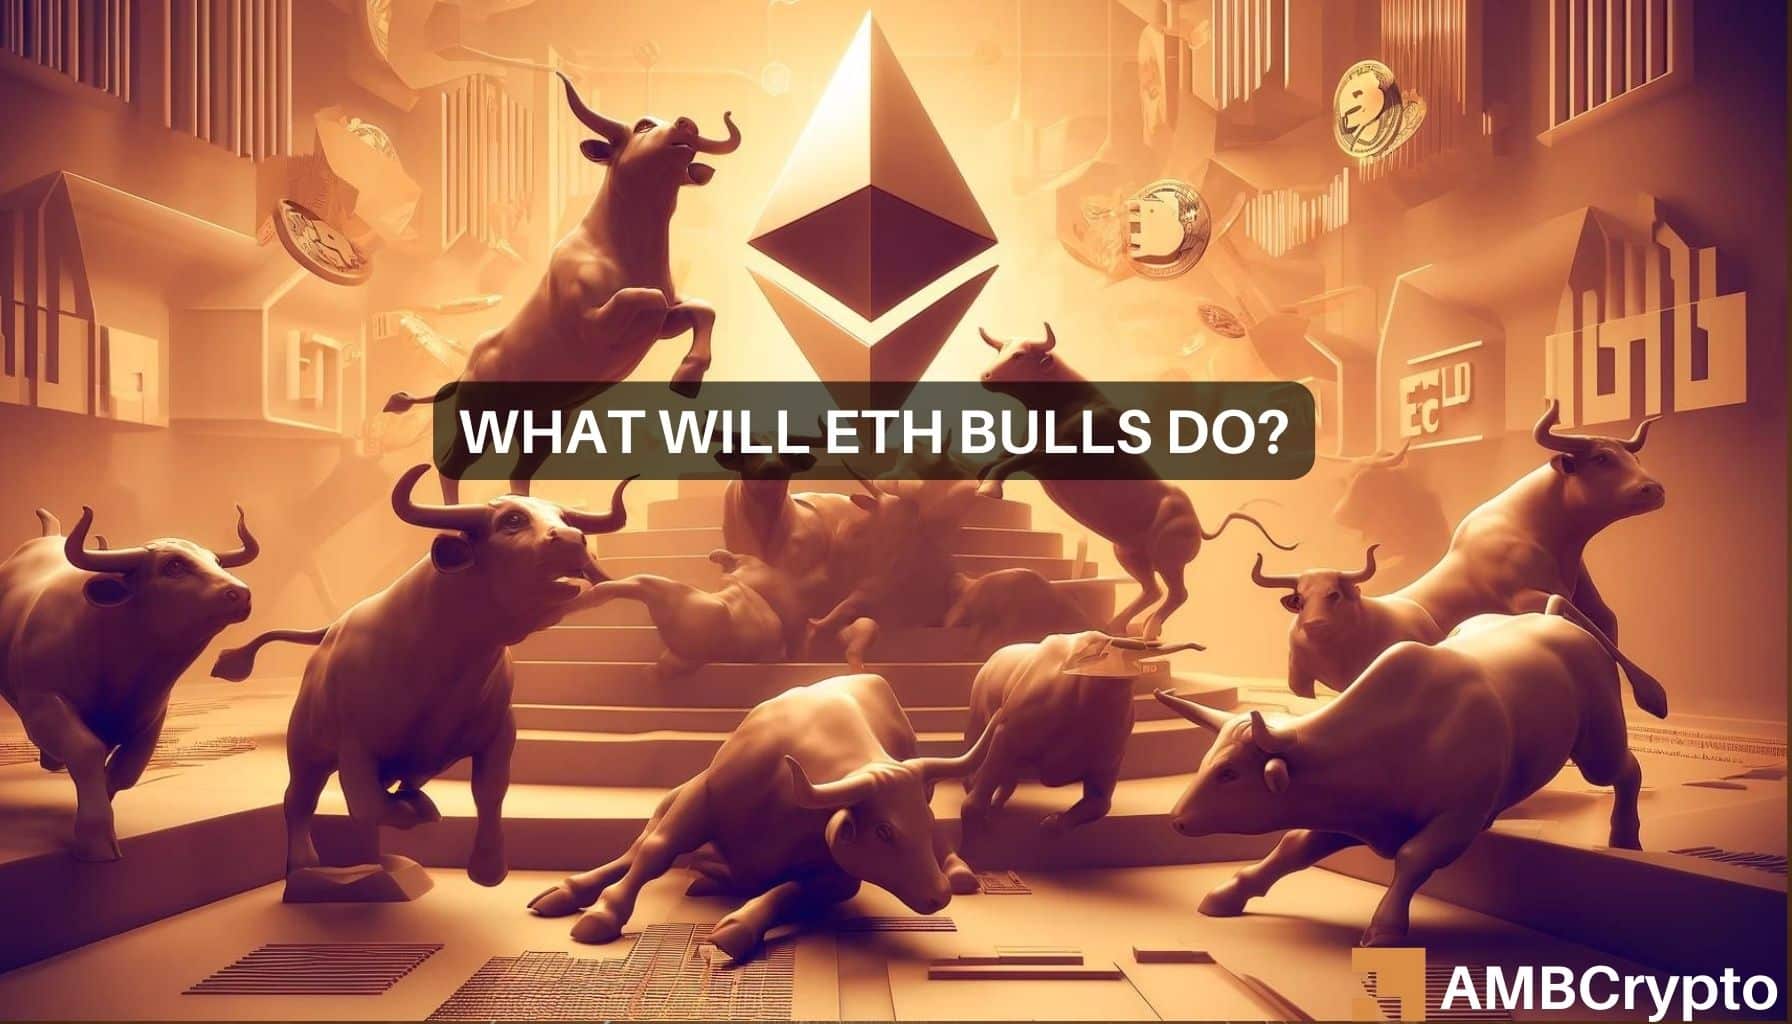 Ethereum’s rally halts: Examining ETH’s potential next moves